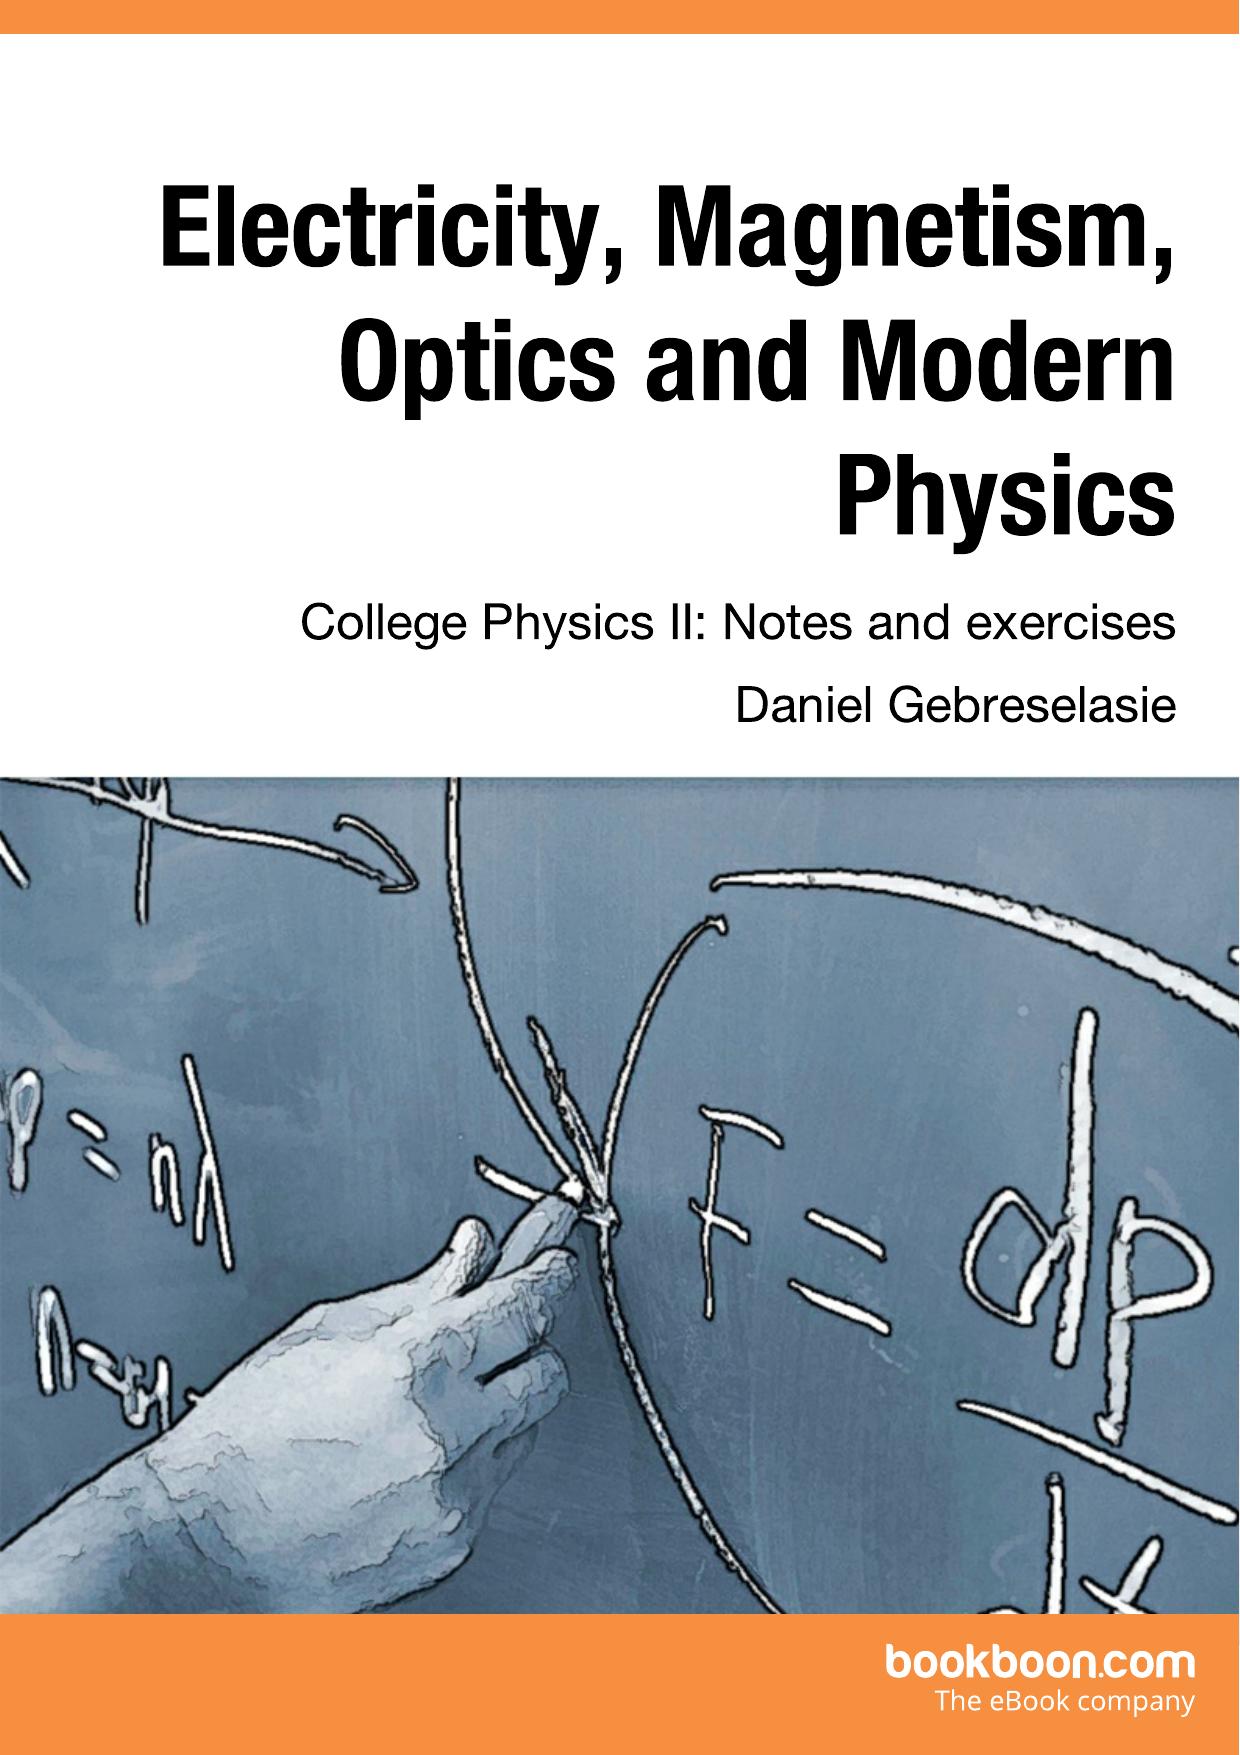 Electricity, Magnetism, Optics and Modern Physics